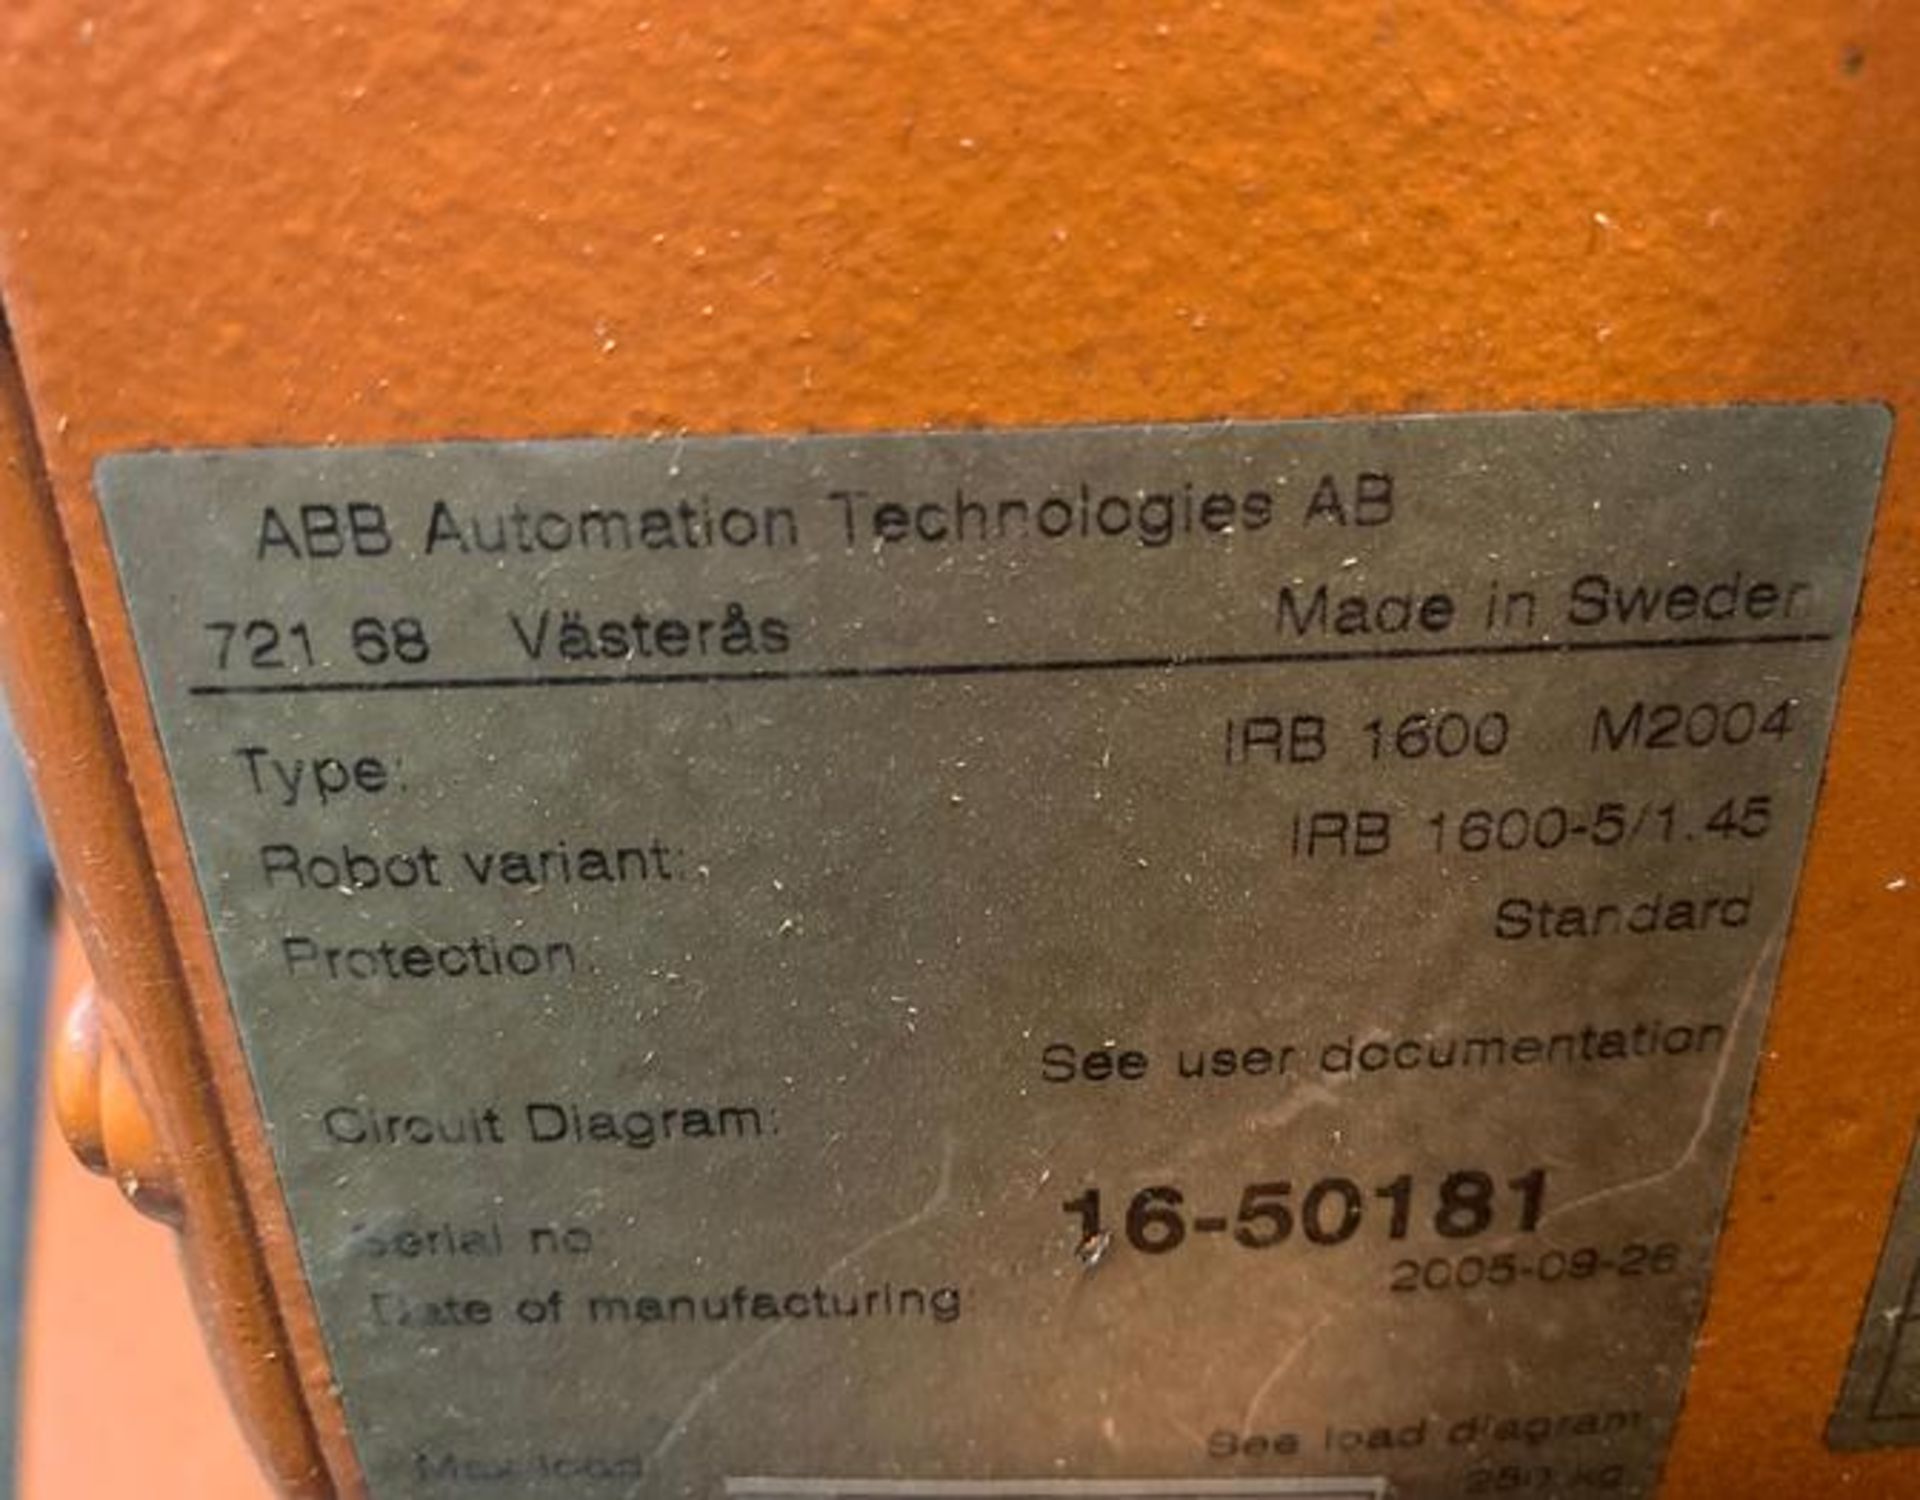 ABB ROBOTS IRB 1600-5/1.45 DUAL ARM ROBOTIC CELL WITH ABB TYPE MTC 750 POSITIONER AND IRC5 CONTROLS - Image 15 of 16